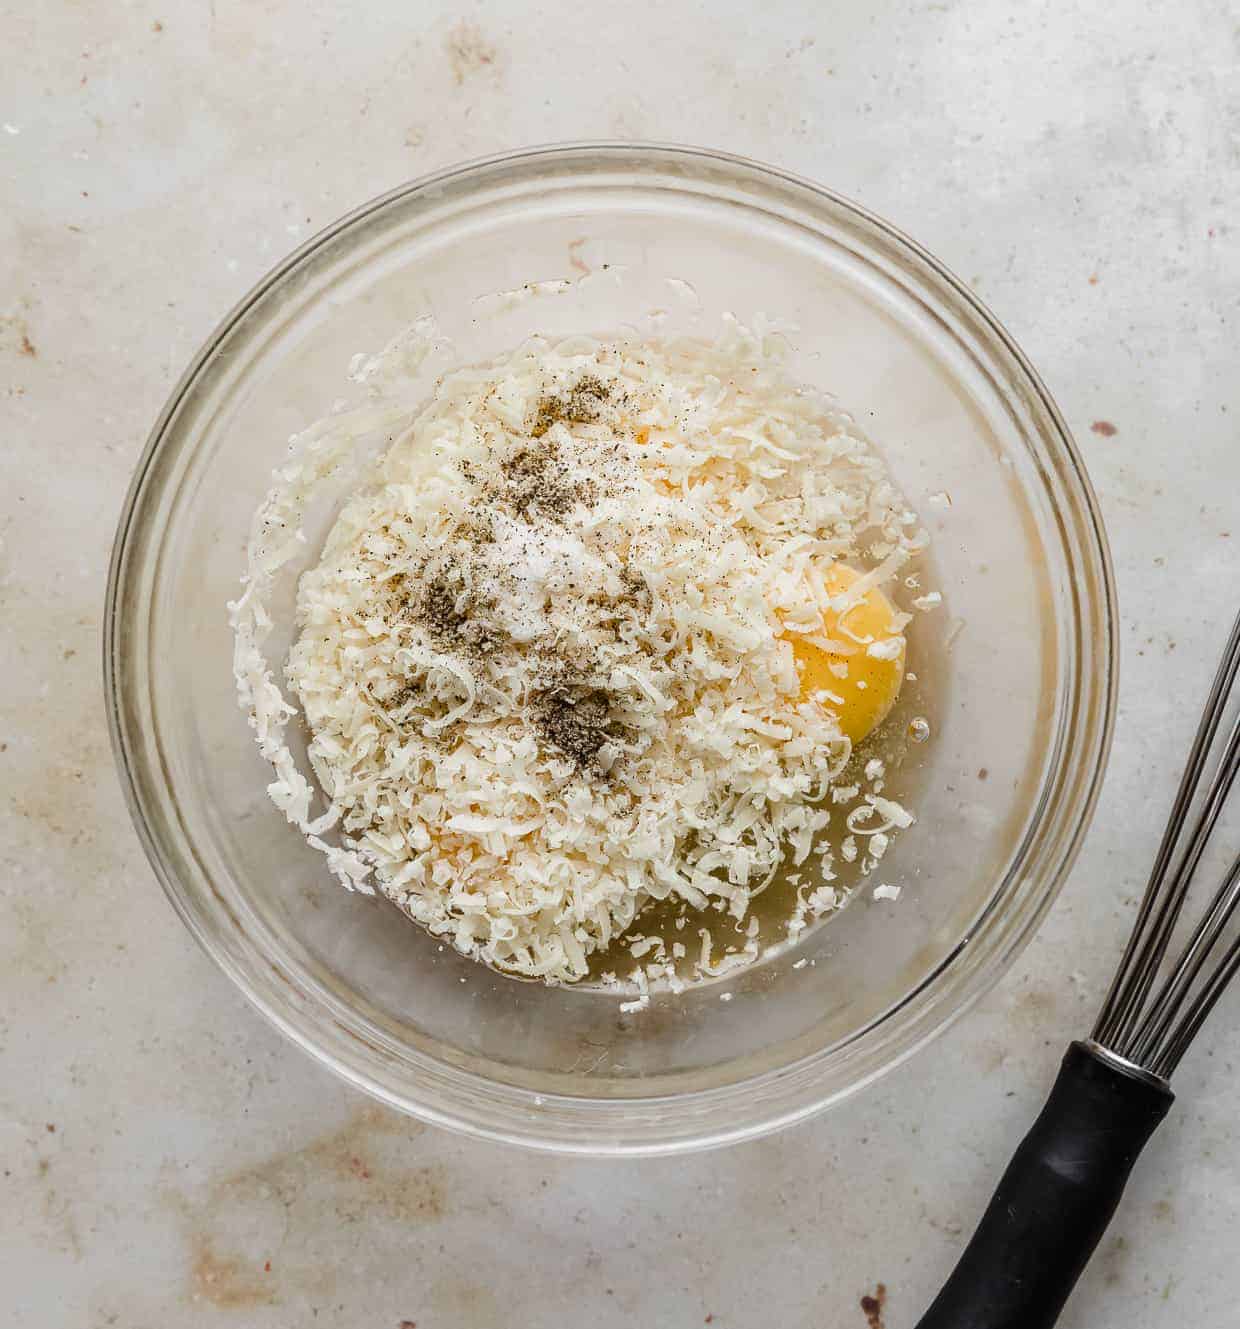 A glass bowl filled with grated parmesan, cracked eggs, and seasonings.